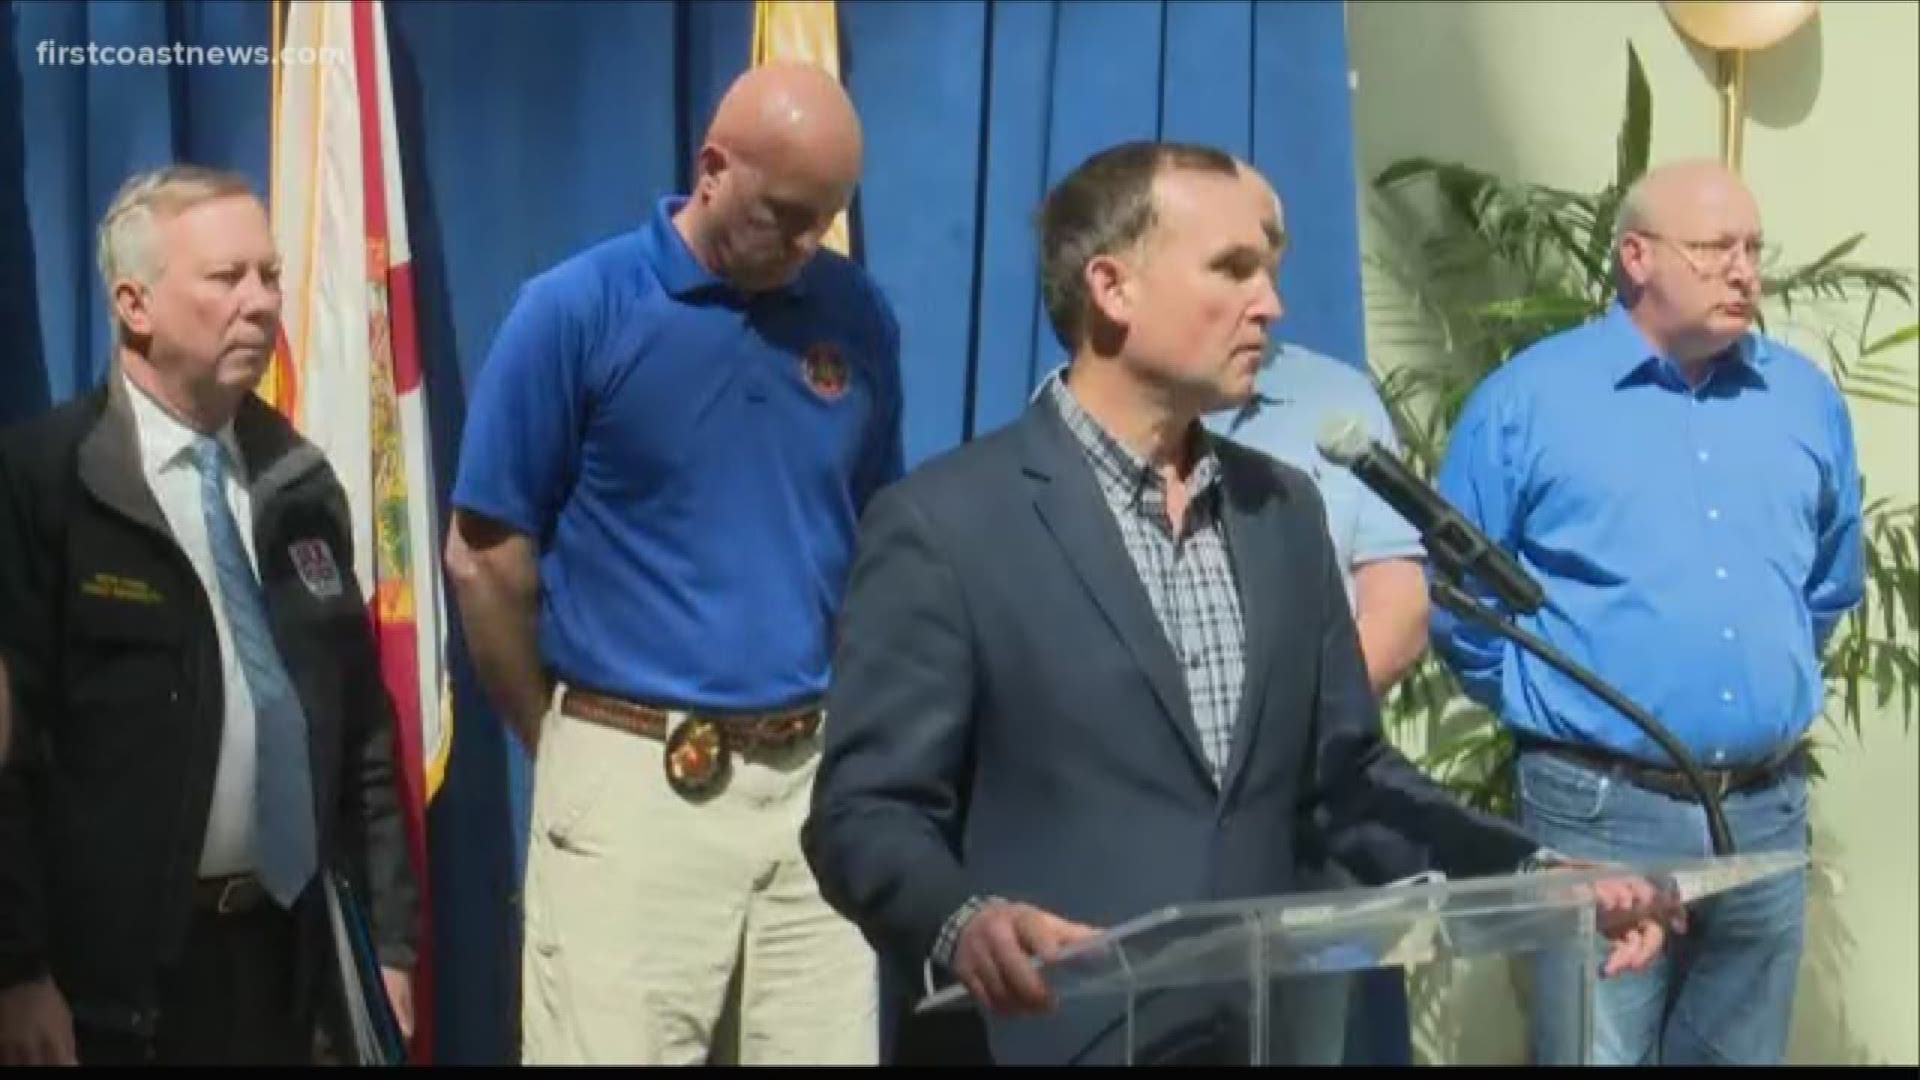 Mayor Curry said all city-owned event venues will remain closed until further notice. This news comes after the first positive case of COVID-19 in Duval County.